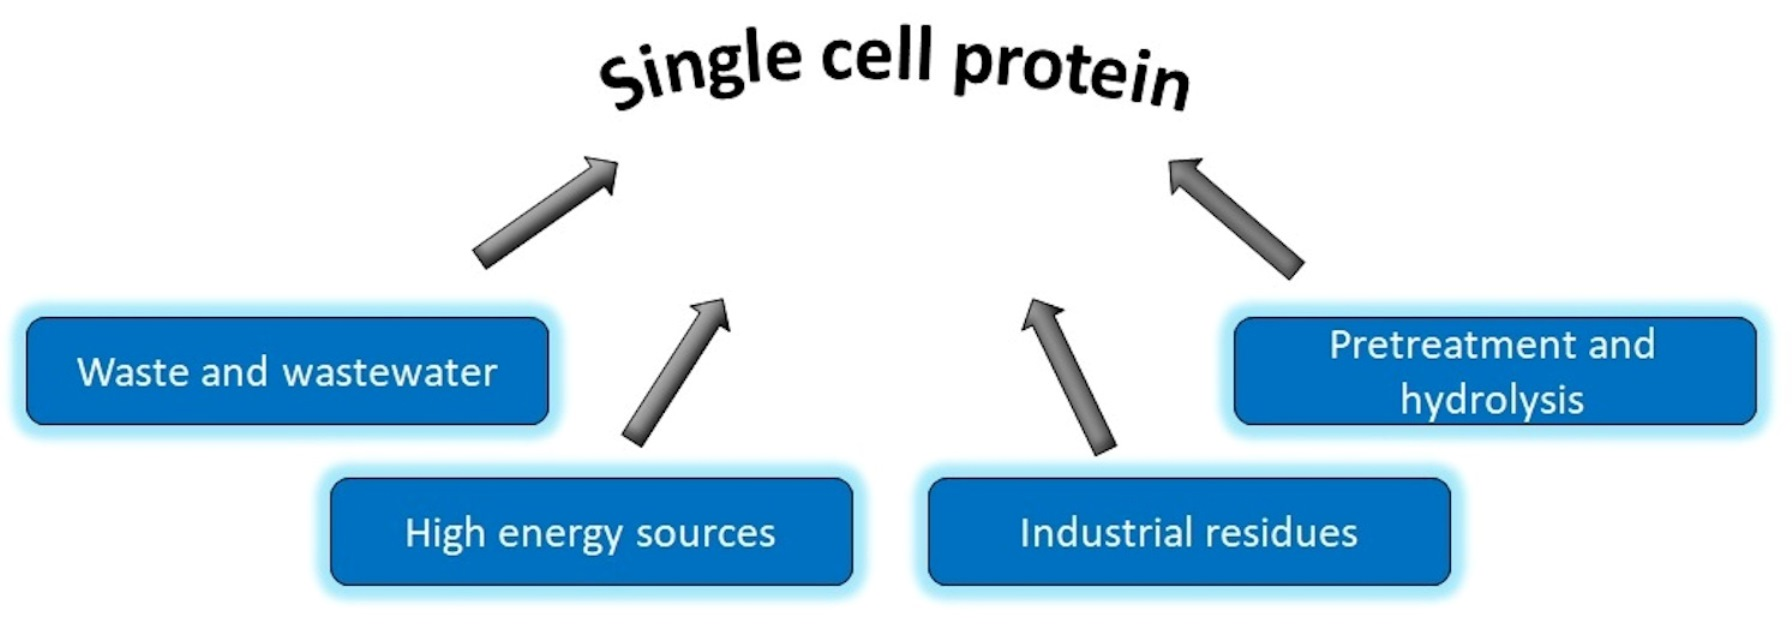 Life-cycle assessment of yeast-based single-cell protein